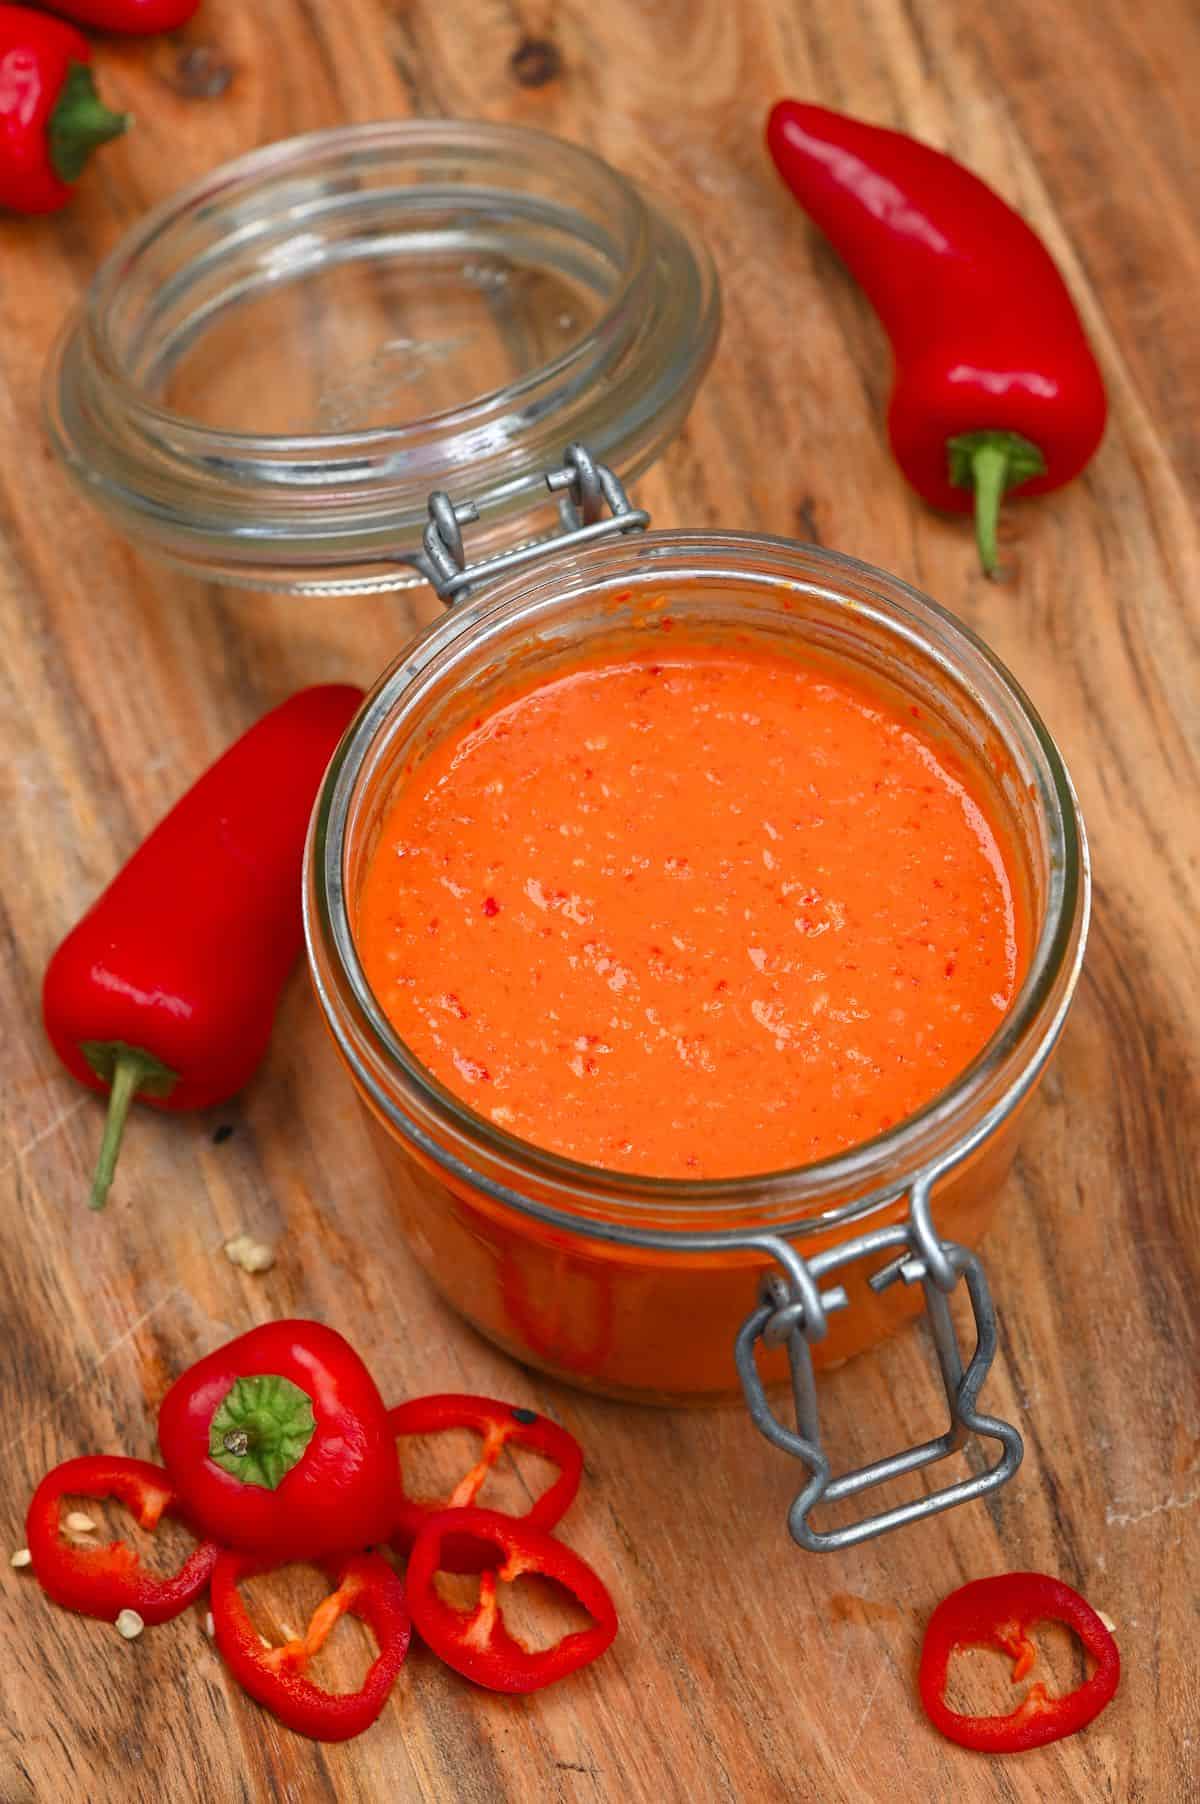 Homemade Red chilli sauce in a jar with some chilies around it